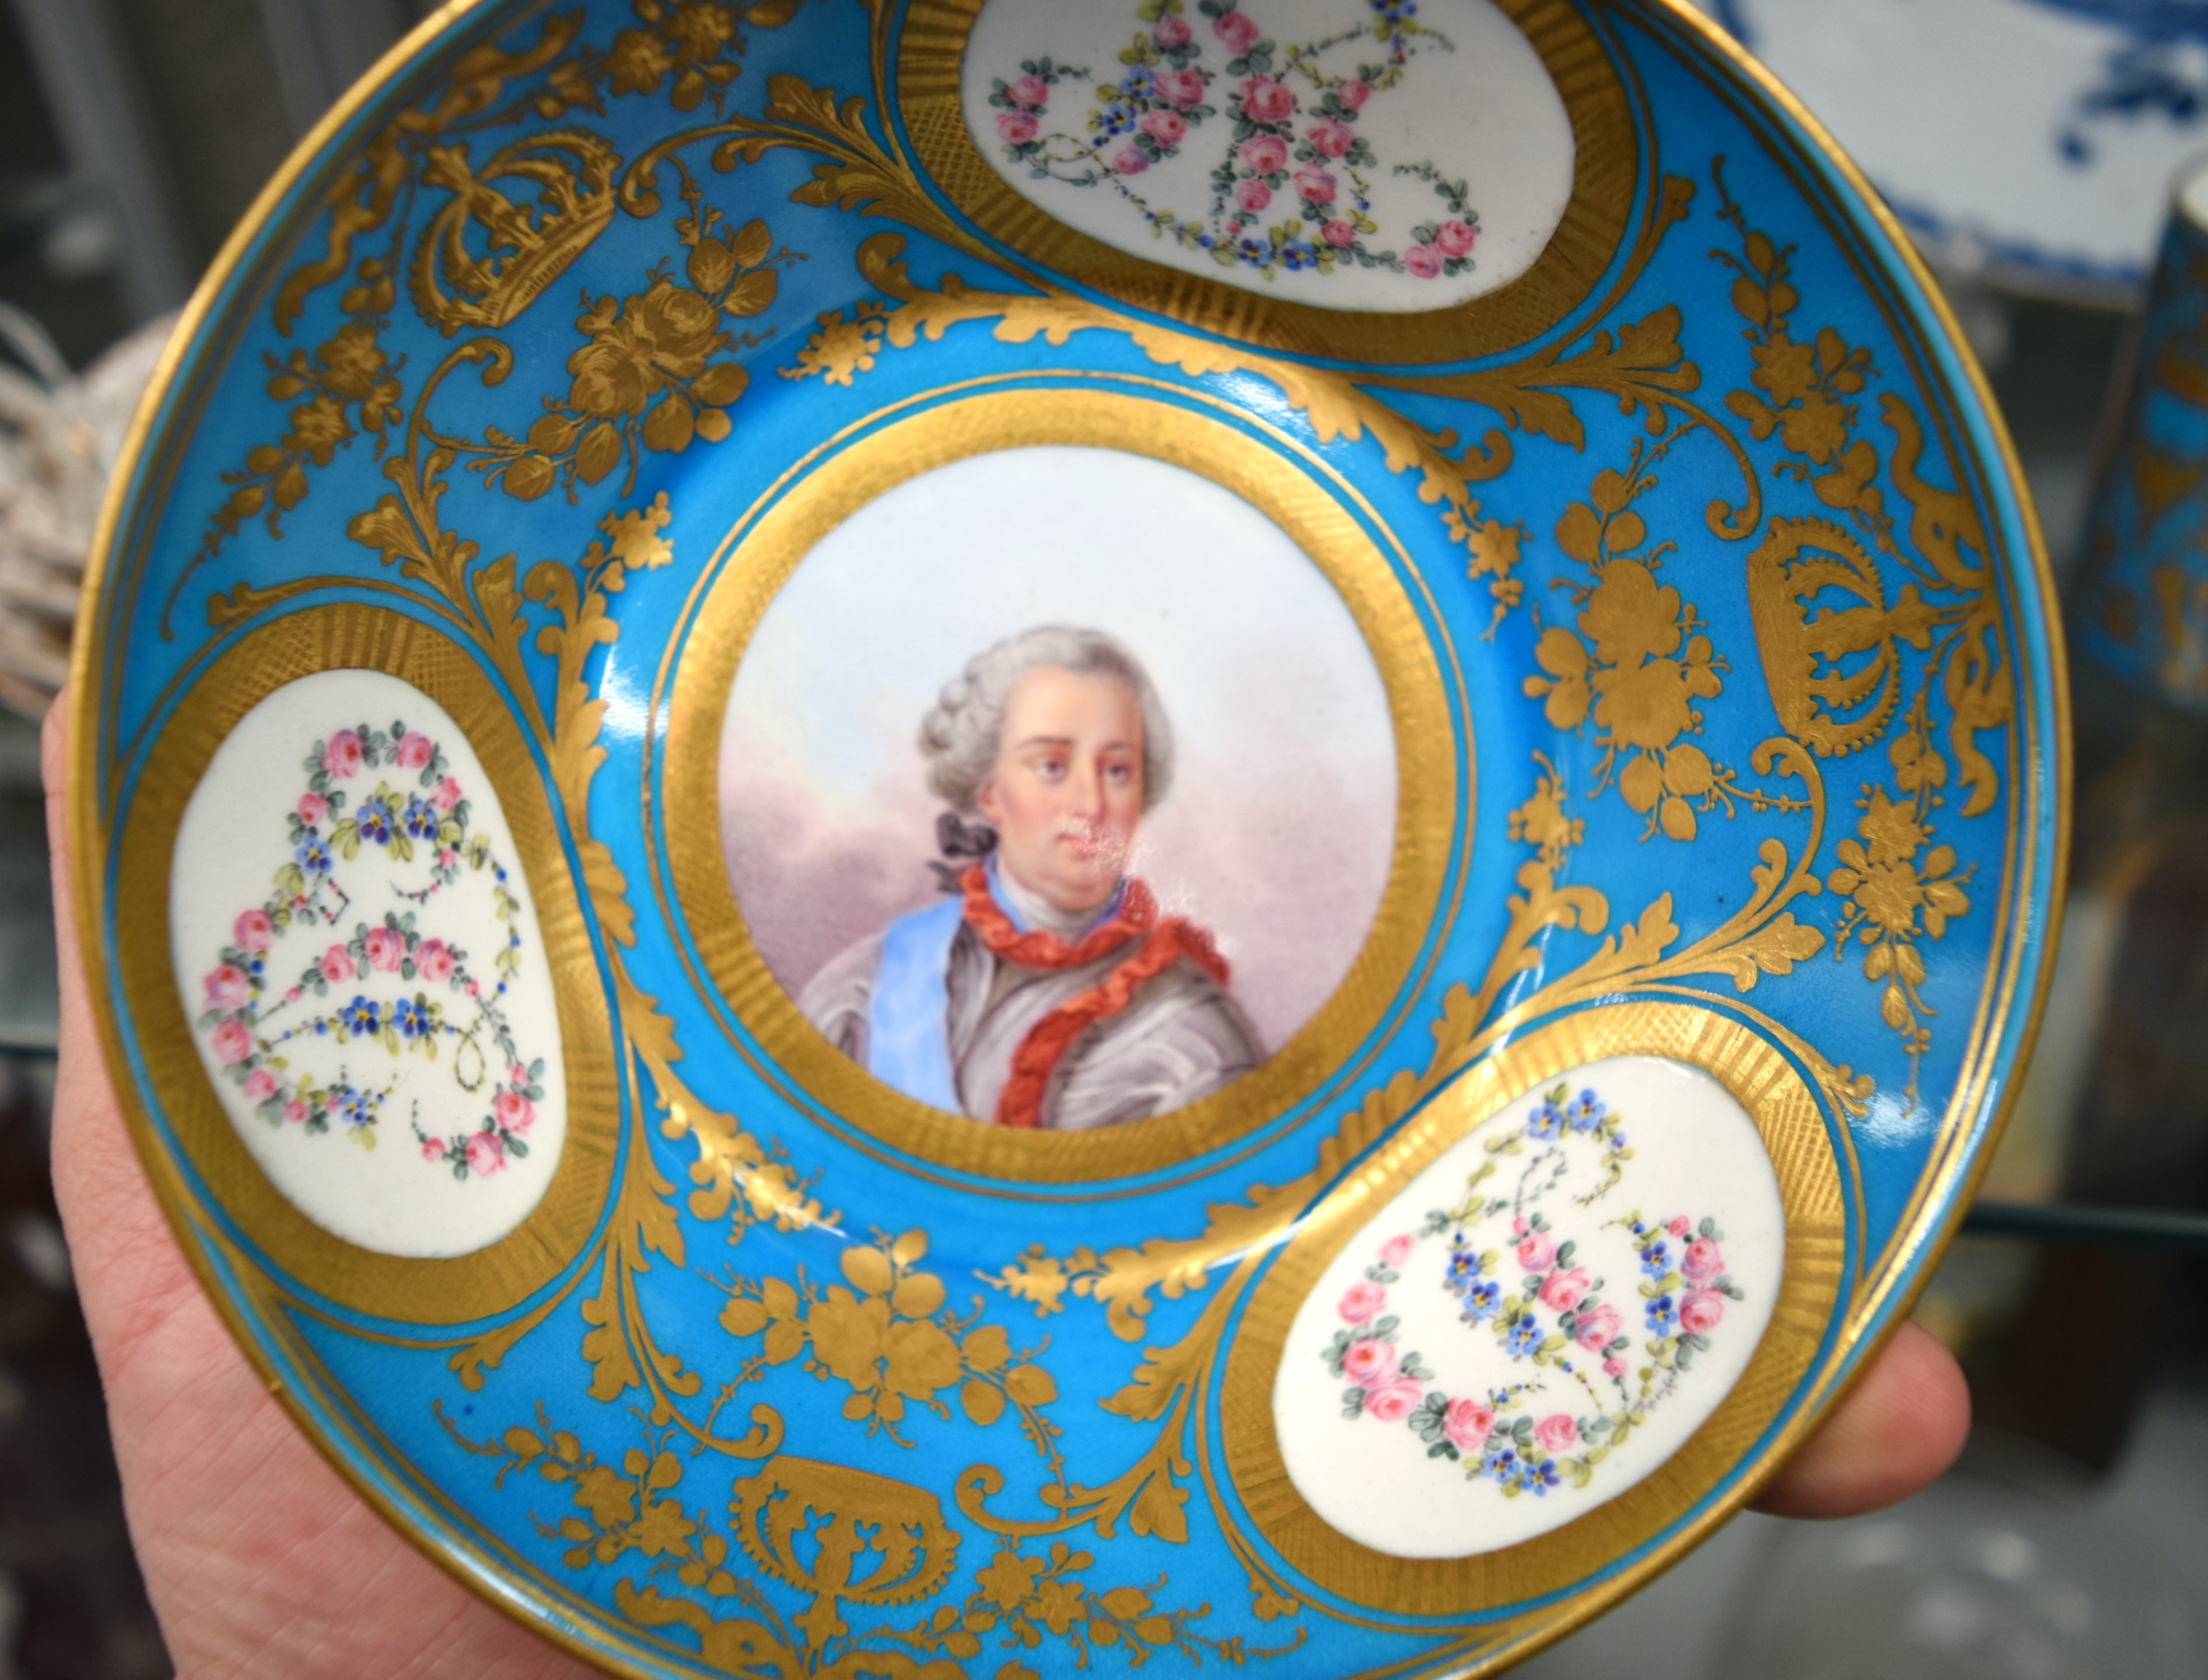 A FINE 19TH CENTURY SEVRES PORCELAIN CABINET CUP AND SAUCER painted with portraits and bands of foli - Image 9 of 20